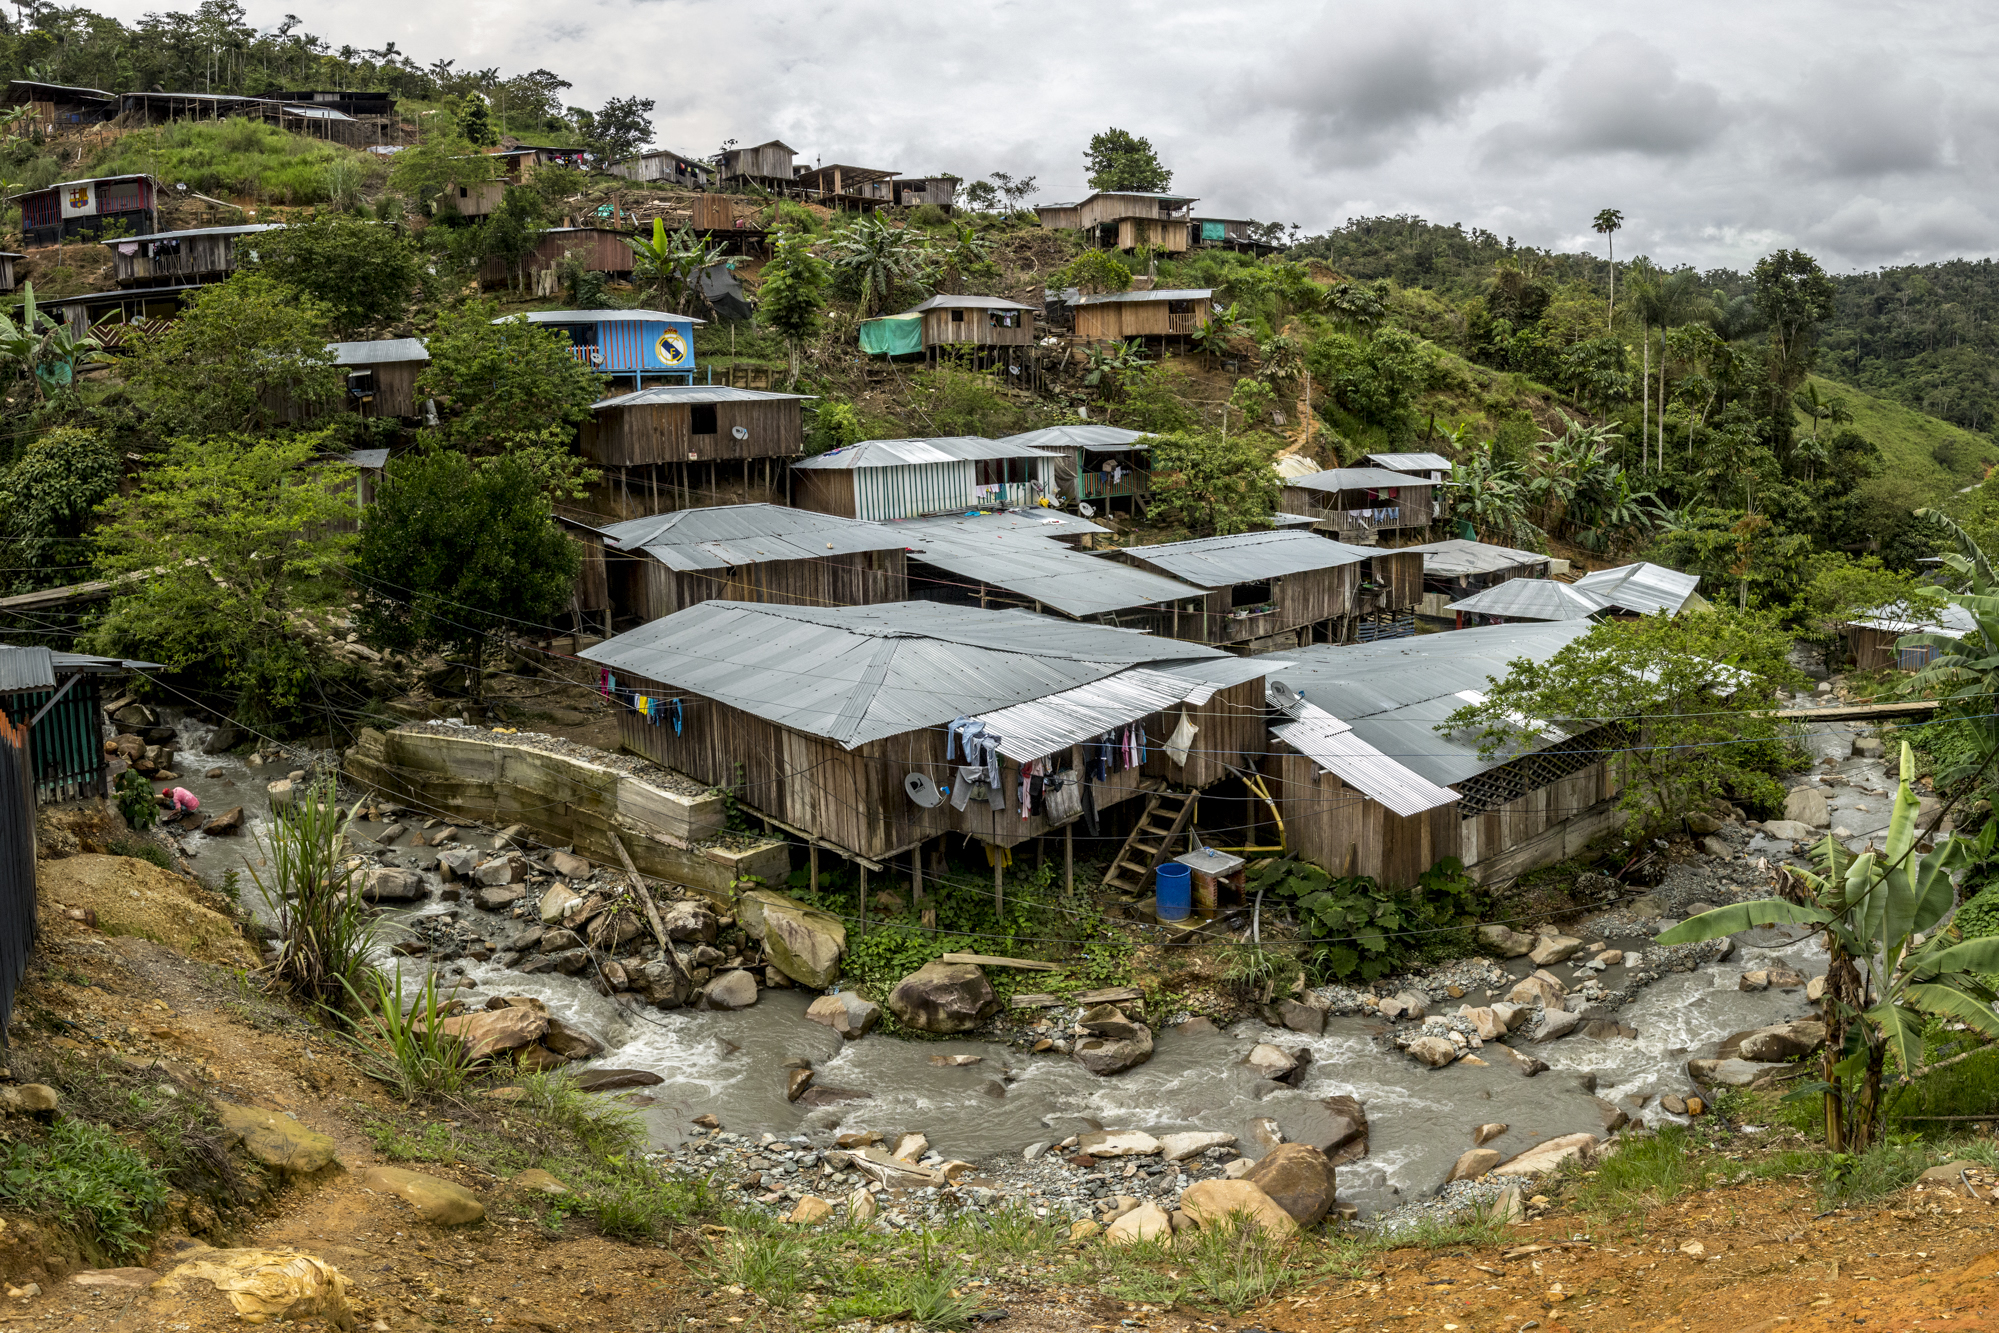  In the community of Alto Caribona, known as Mina Walter, there is no presence of the Colombian State. It was built and maintained by the people themselves who generate electricity, provide water, built the &nbsp;school, church, clinic and the gold m